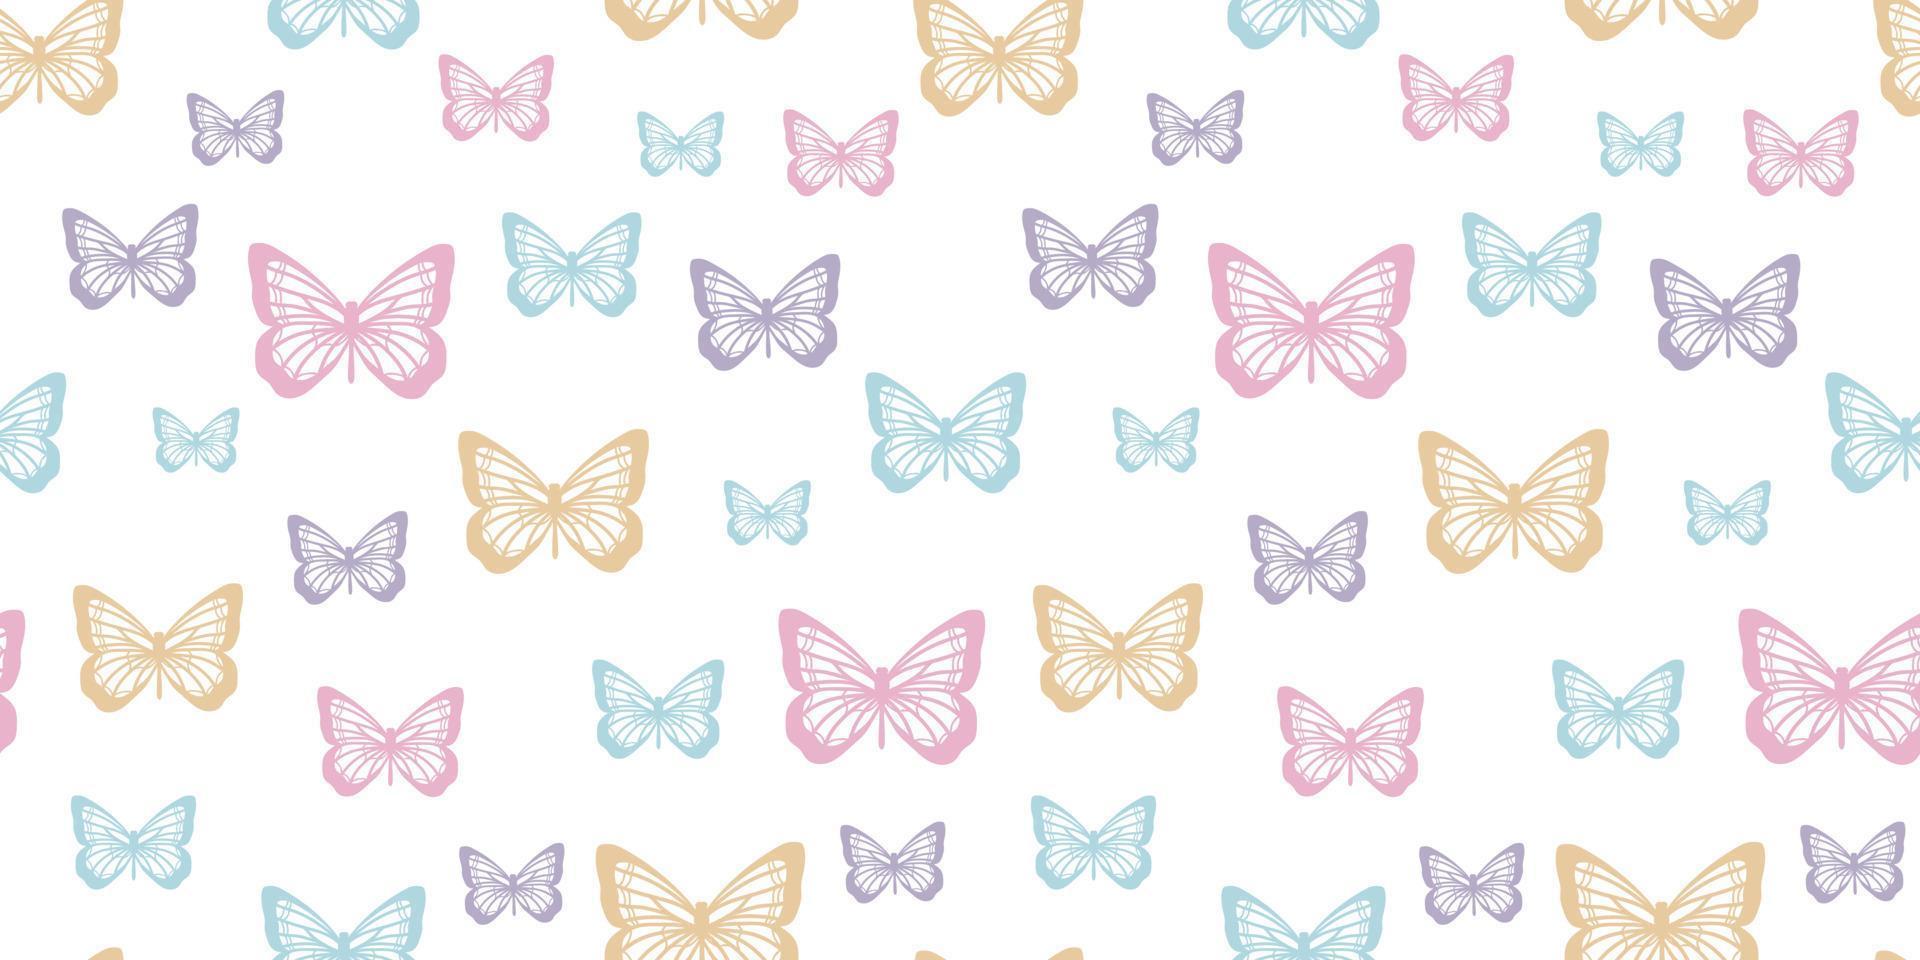 Butterfly, colorful seamless repeat pattern design vector